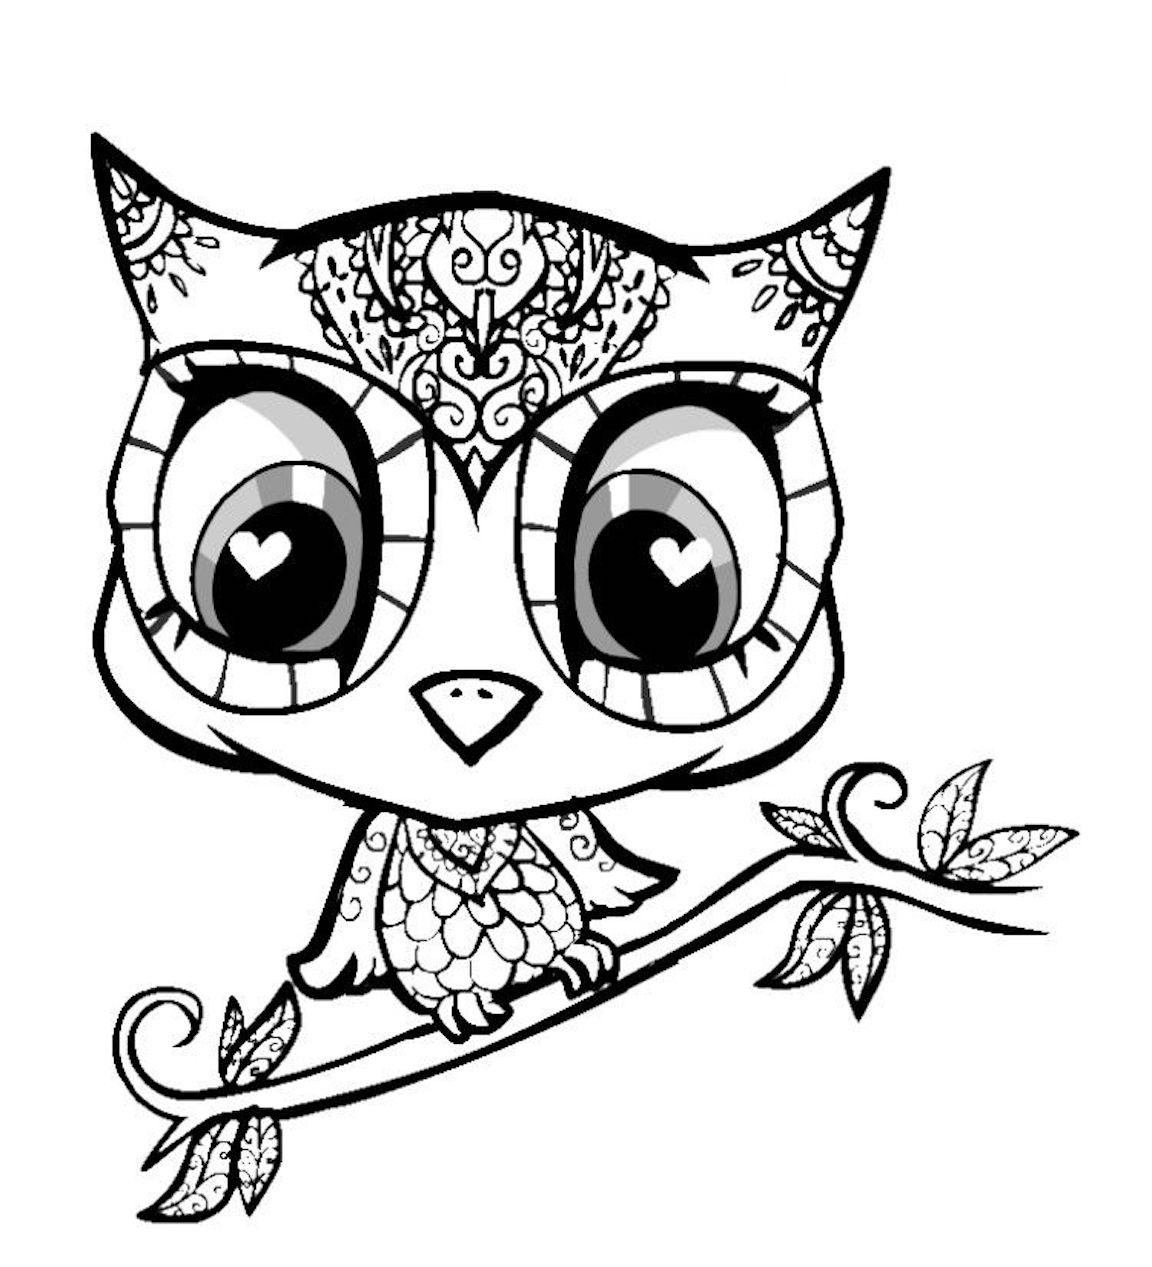 Cute Animal Coloring Page And Other Themed Coloring Challenges